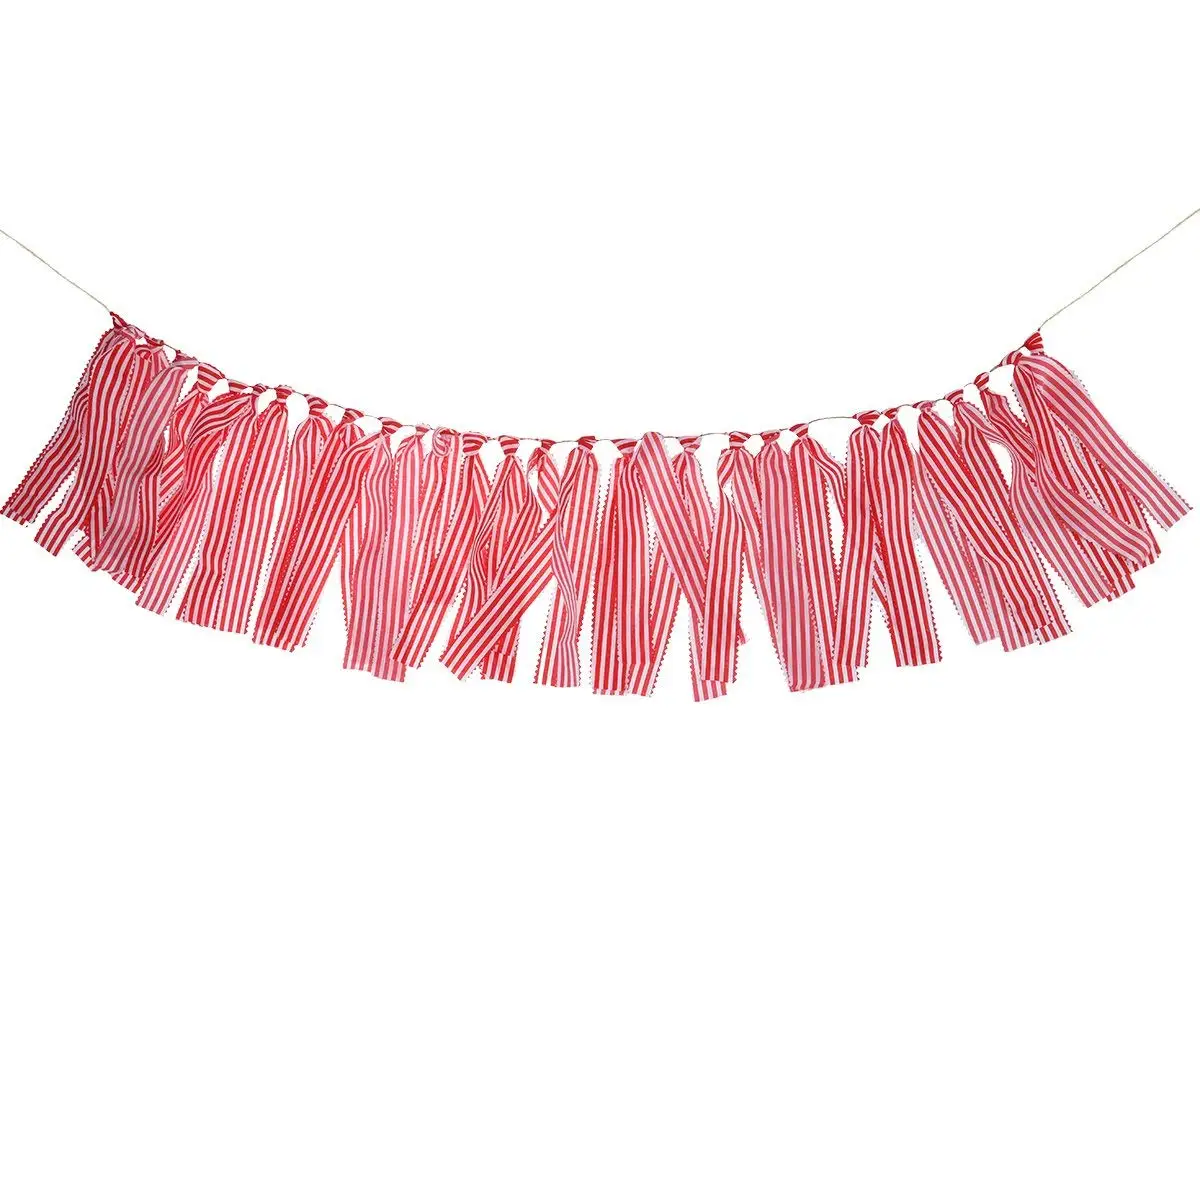 Pink Stripes Fabric Banner Birthday Decor Pennant Flags